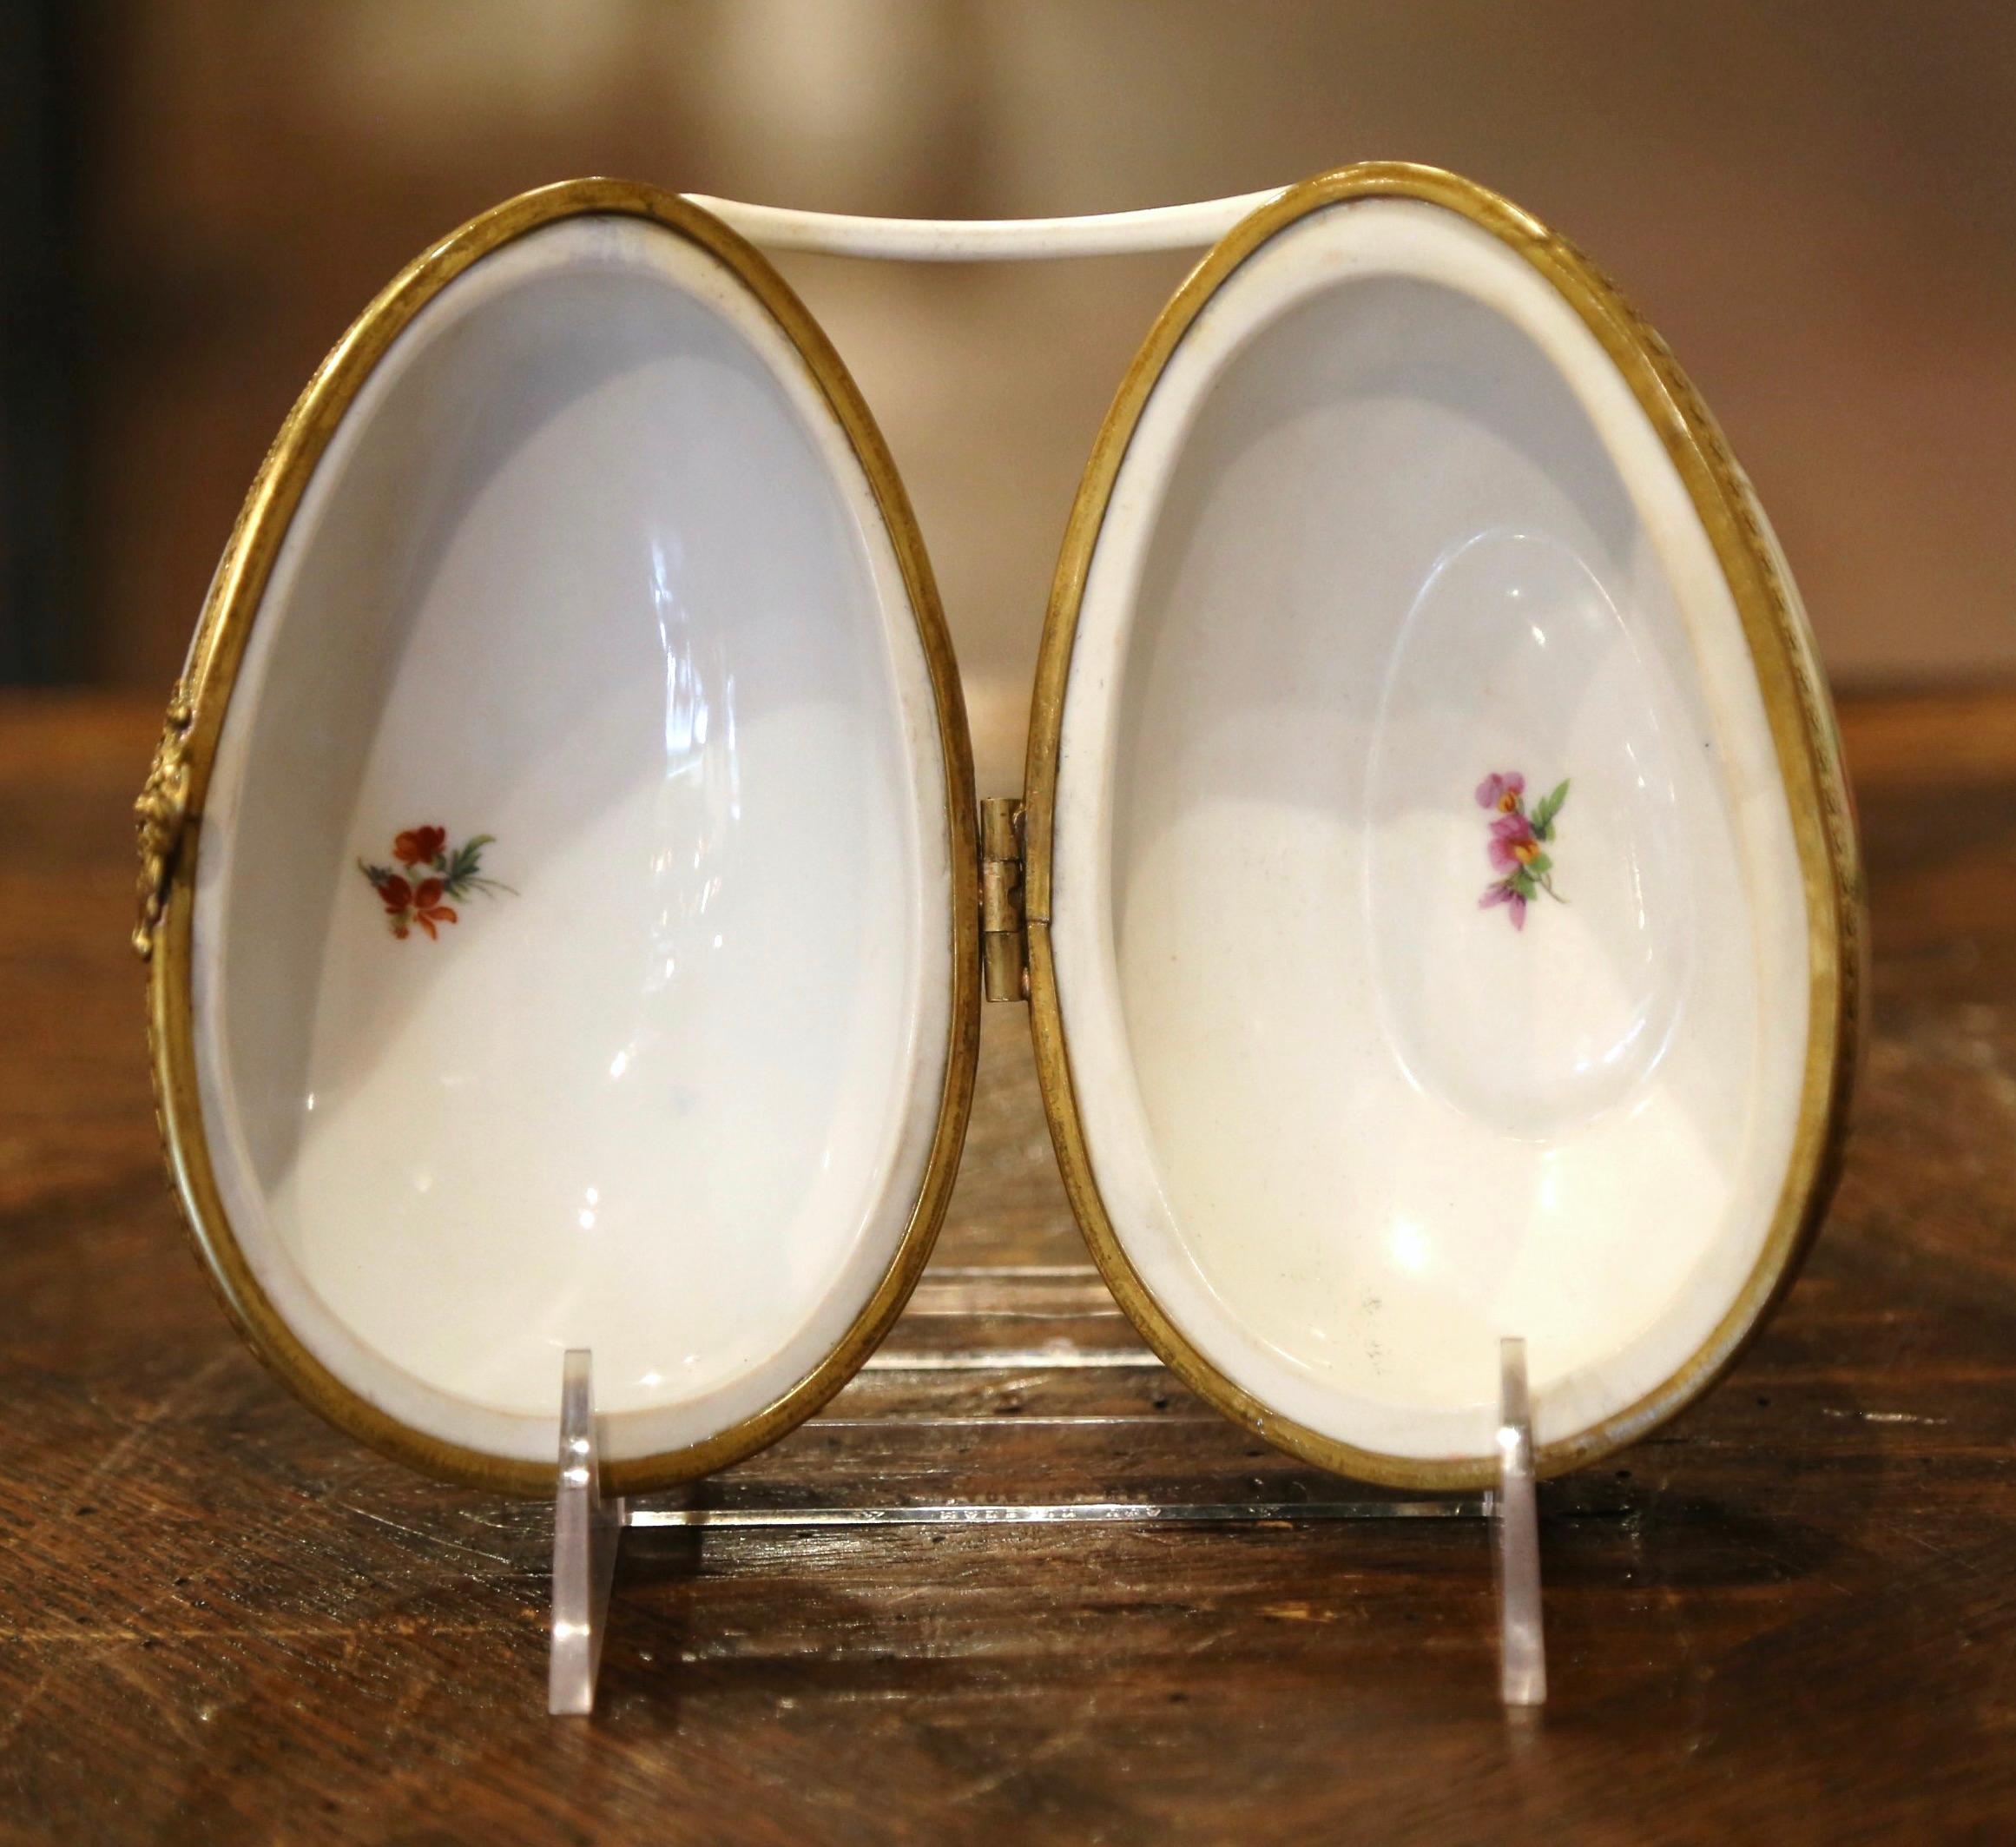 19th Century French Painted Faberge Porcelain Egg Trinket Boxes, Set of 5 9